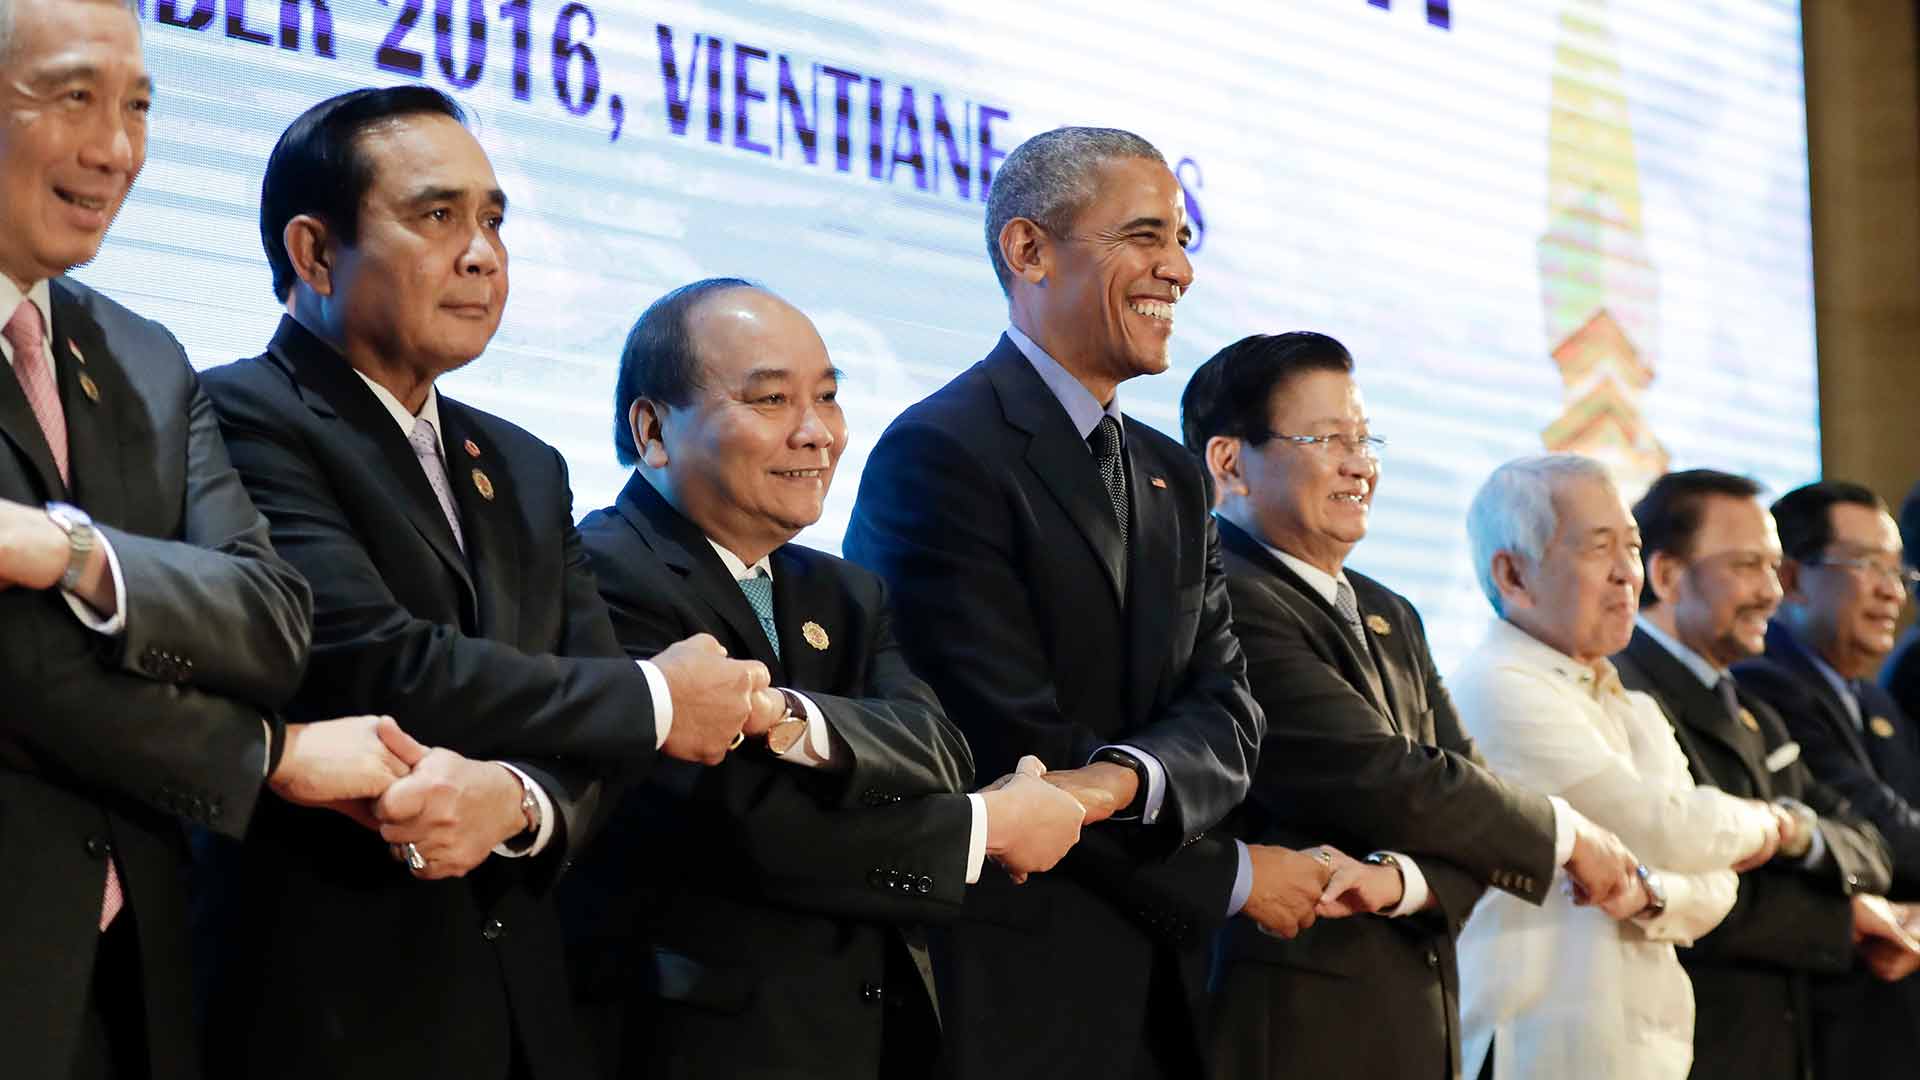 U.S. President Barack Obama poses for a photo before the start of the 4th ASEAN-U.S. Summit Meeting at National Convention Center in Vientiane, Laos, Thursday, Sept. 8, 2016. From left: Singapore's Prime Minister Lee Hsien Loong, Thailand's Prime Minister Prayuth Chan-ocha, Vietnam's Prime Minister Nguyen Xuan Phuc, U.S. President Barack Obama, Laos' Prime Minister Thongloun Sisoulith, Philippines Foreign Affairs Secretary Perfecto Yasay, Brunei's Sultan Hassanal Bolkiah and Cambodia's Prime Minister Hun Sen. (AP Photo/Carolyn Kaster)